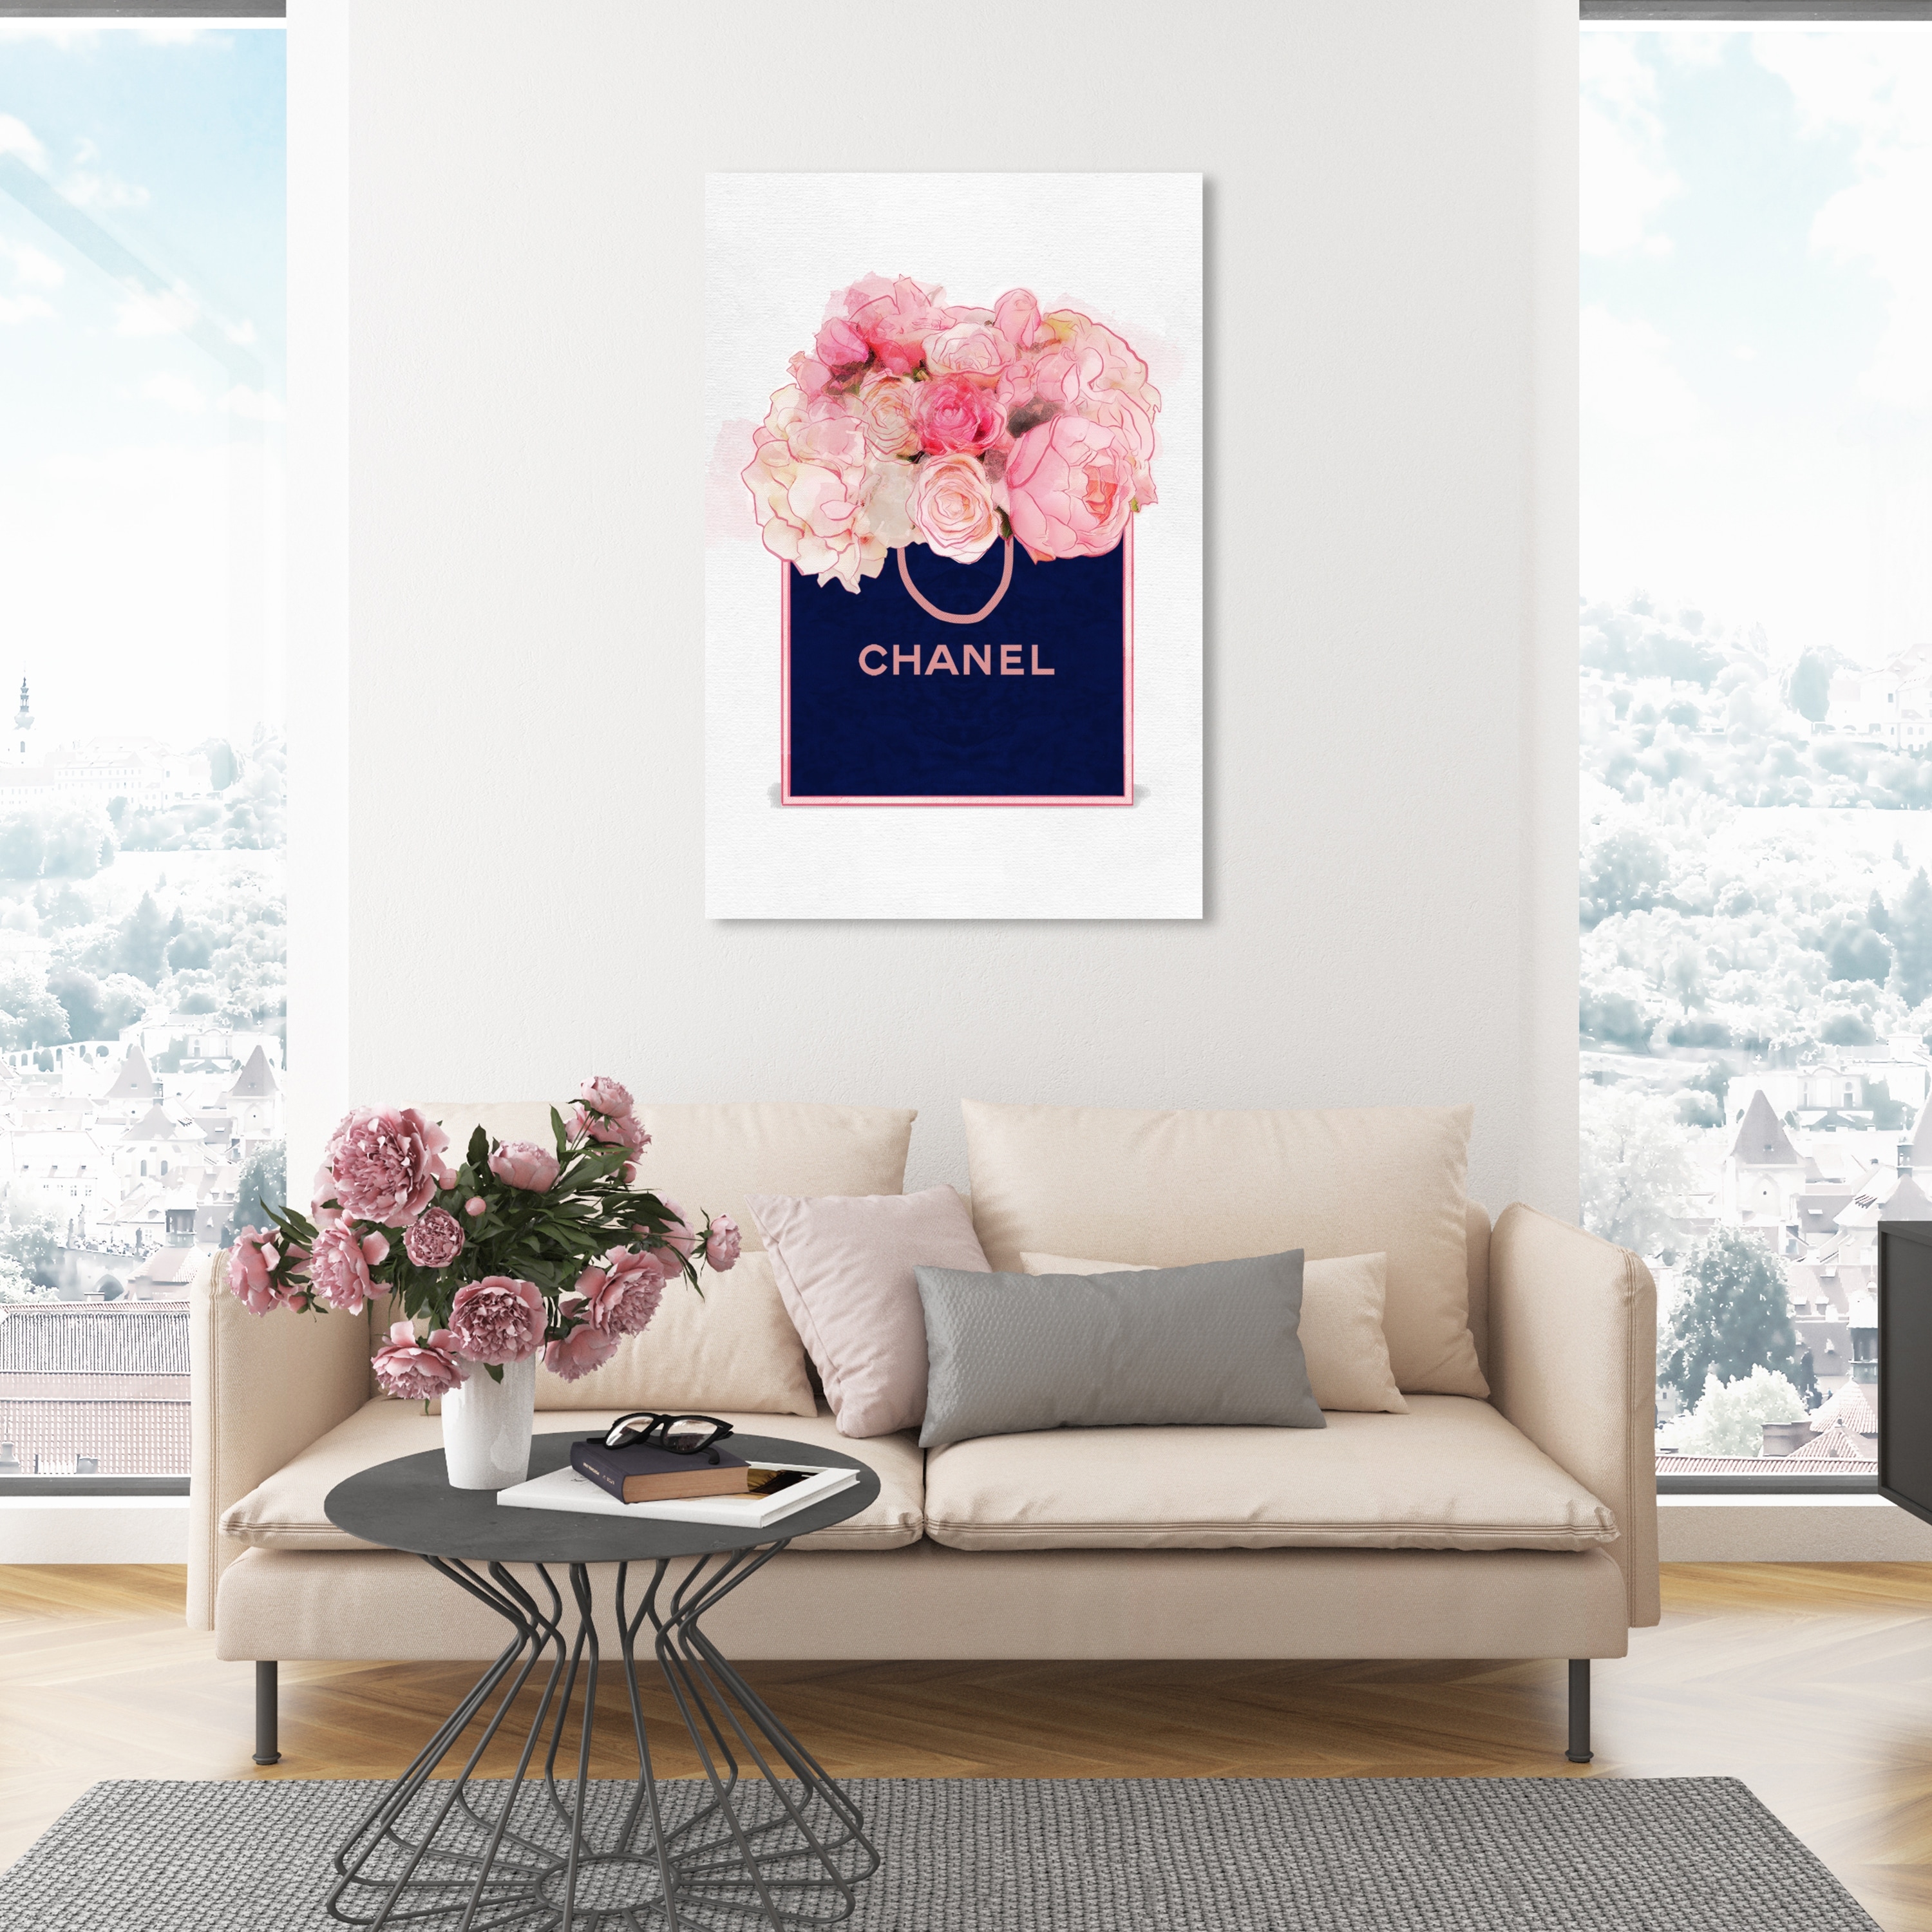 Oliver Gal 'Flower Bag Flocked' Fashion and Glam Wall Art Canvas Print  Lifestyle - Blue, Pink - Bed Bath & Beyond - 32479197